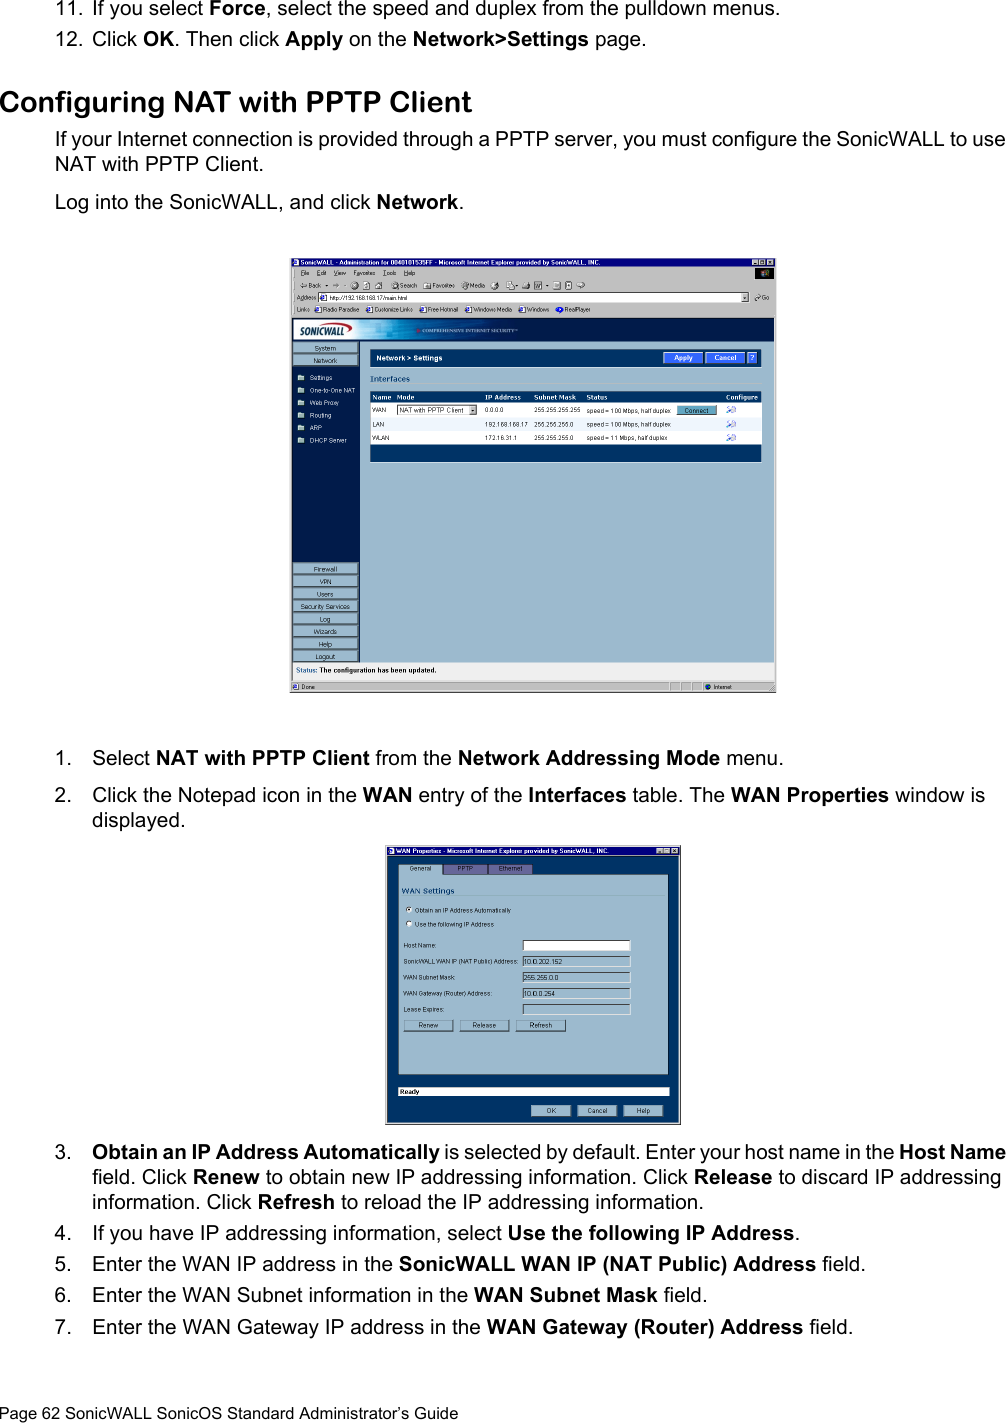 Page 62 SonicWALL SonicOS Standard Administrator’s Guide11. If you select Force, select the speed and duplex from the pulldown menus. 12. Click OK. Then click Apply on the Network&gt;Settings page. Configuring NAT with PPTP Client If your Internet connection is provided through a PPTP server, you must configure the SonicWALL to use NAT with PPTP Client. Log into the SonicWALL, and click Network. 1. Select NAT with PPTP Client from the Network Addressing Mode menu.2. Click the Notepad icon in the WAN entry of the Interfaces table. The WAN Properties window is displayed. 3. Obtain an IP Address Automatically is selected by default. Enter your host name in the Host Name field. Click Renew to obtain new IP addressing information. Click Release to discard IP addressing information. Click Refresh to reload the IP addressing information. 4. If you have IP addressing information, select Use the following IP Address. 5. Enter the WAN IP address in the SonicWALL WAN IP (NAT Public) Address field. 6. Enter the WAN Subnet information in the WAN Subnet Mask field. 7. Enter the WAN Gateway IP address in the WAN Gateway (Router) Address field. 